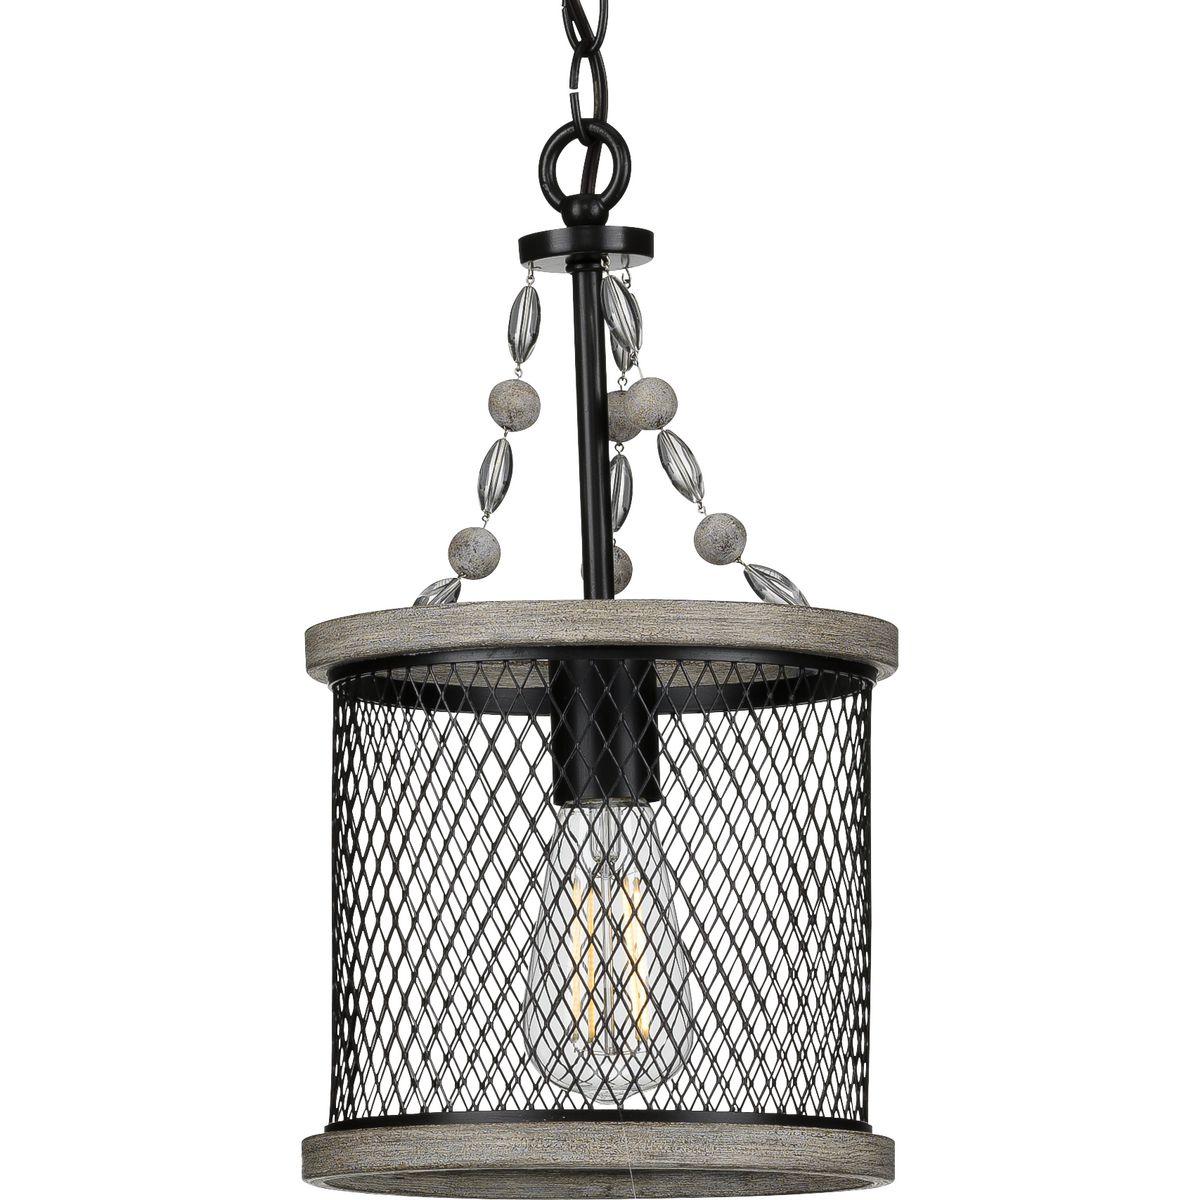 Hubbell P500228-020 Your home will exude comfort and sophistication with the graceful Austelle Collection One-Light Antique Bronze Mini-Pendant. A breathtaking mesh shade accented by a gorgeous antique bronze finish takes center stage in this design. Decorative wooden beads 